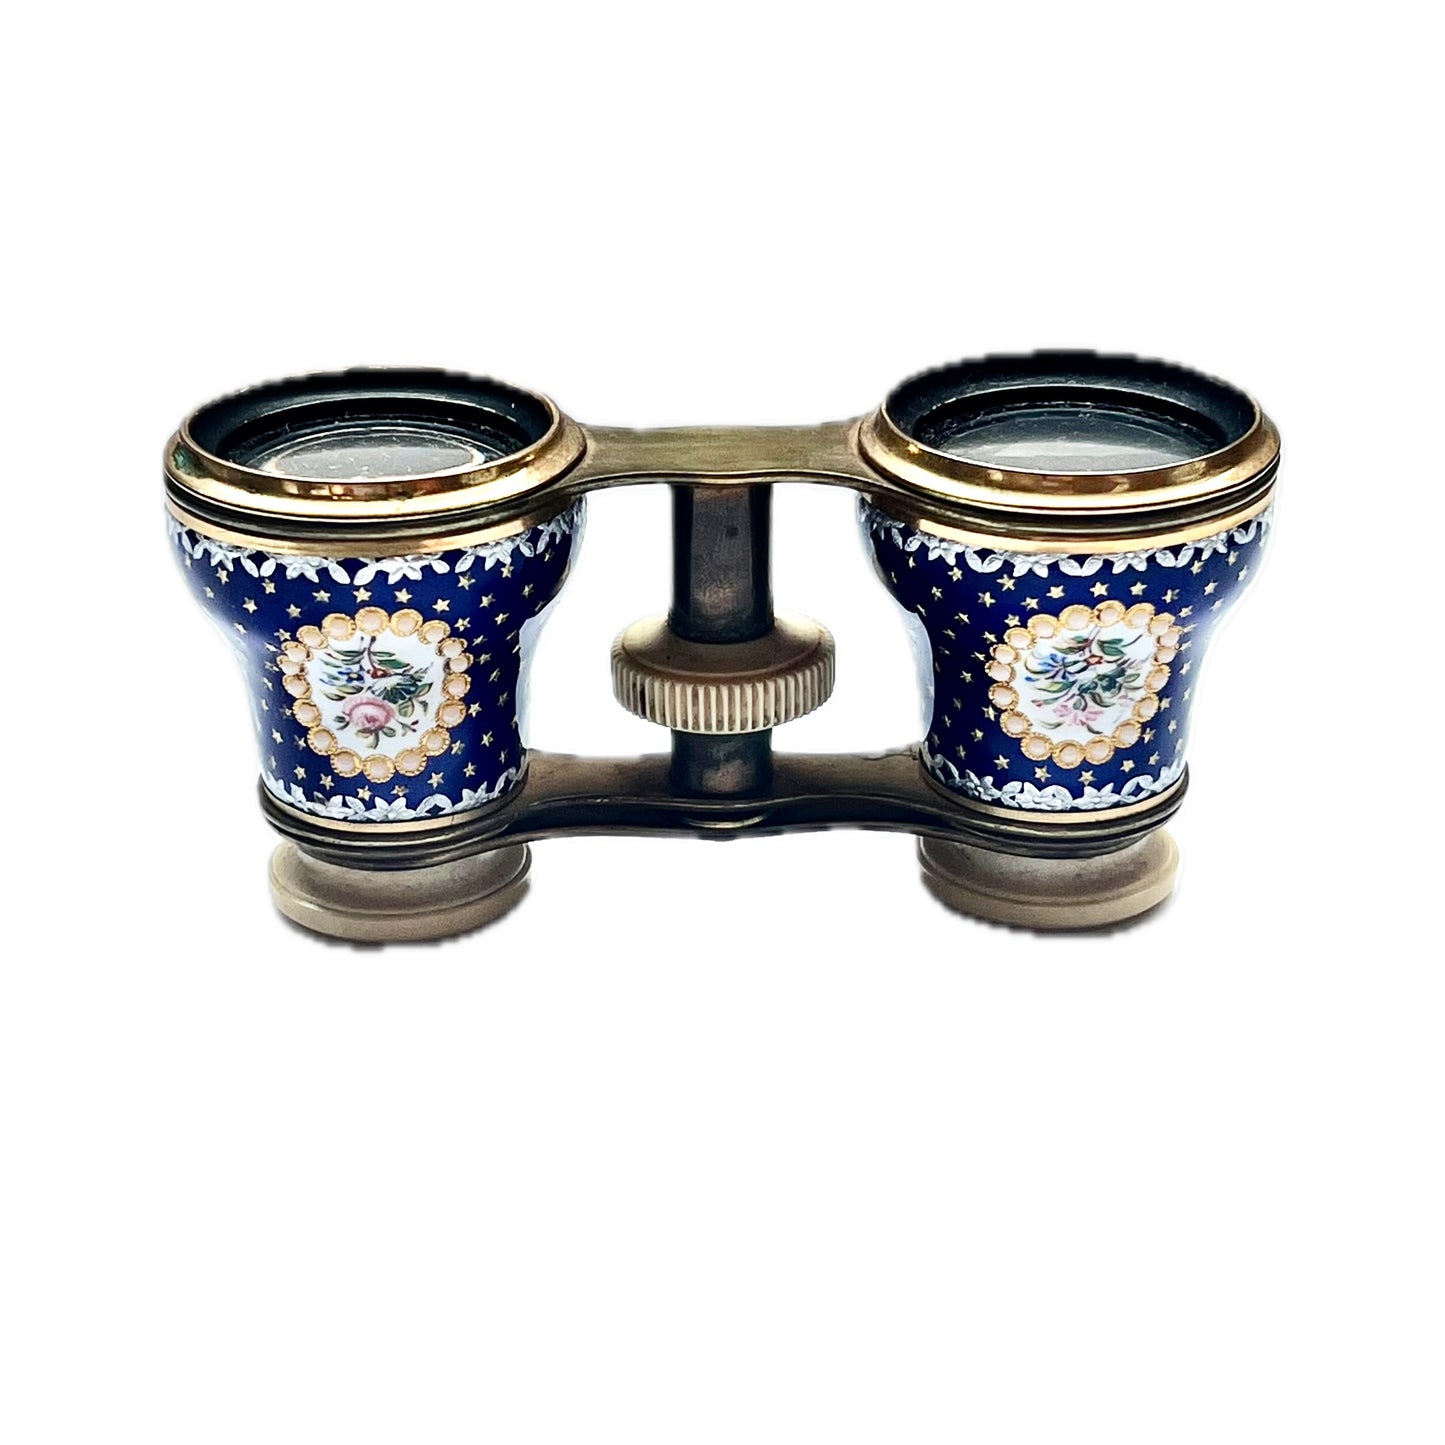 A beautiful 19th century pair of French opera glasses, enamelled florals and brass in original case